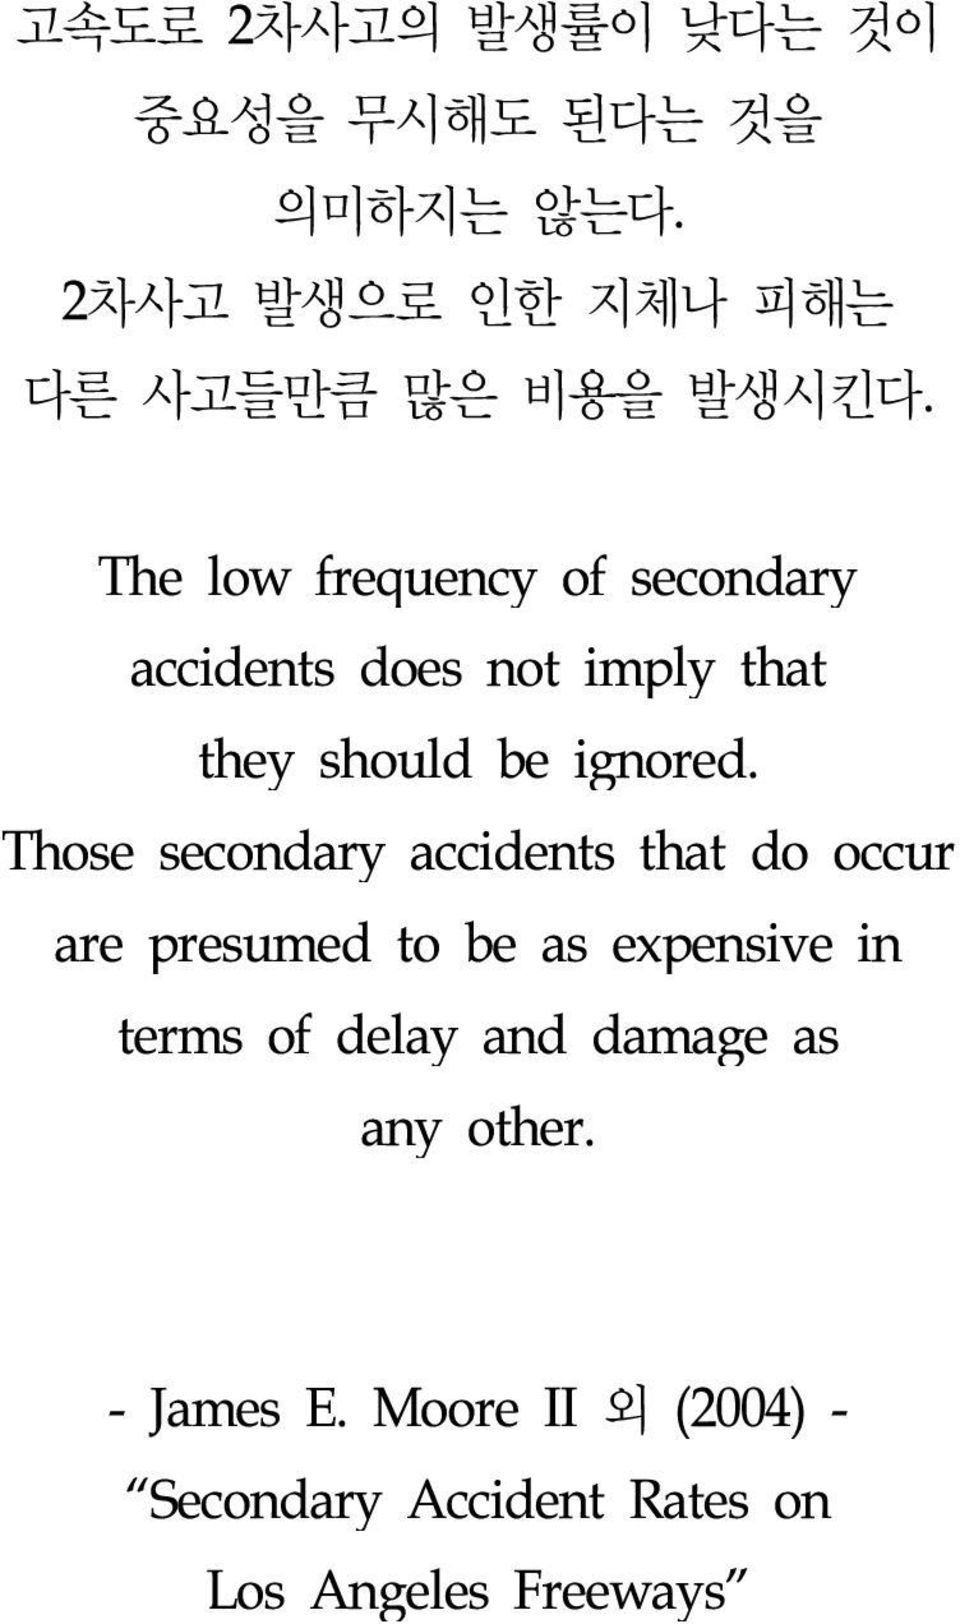 The low frequency of secondary accidents does not imply that they should be ignored.